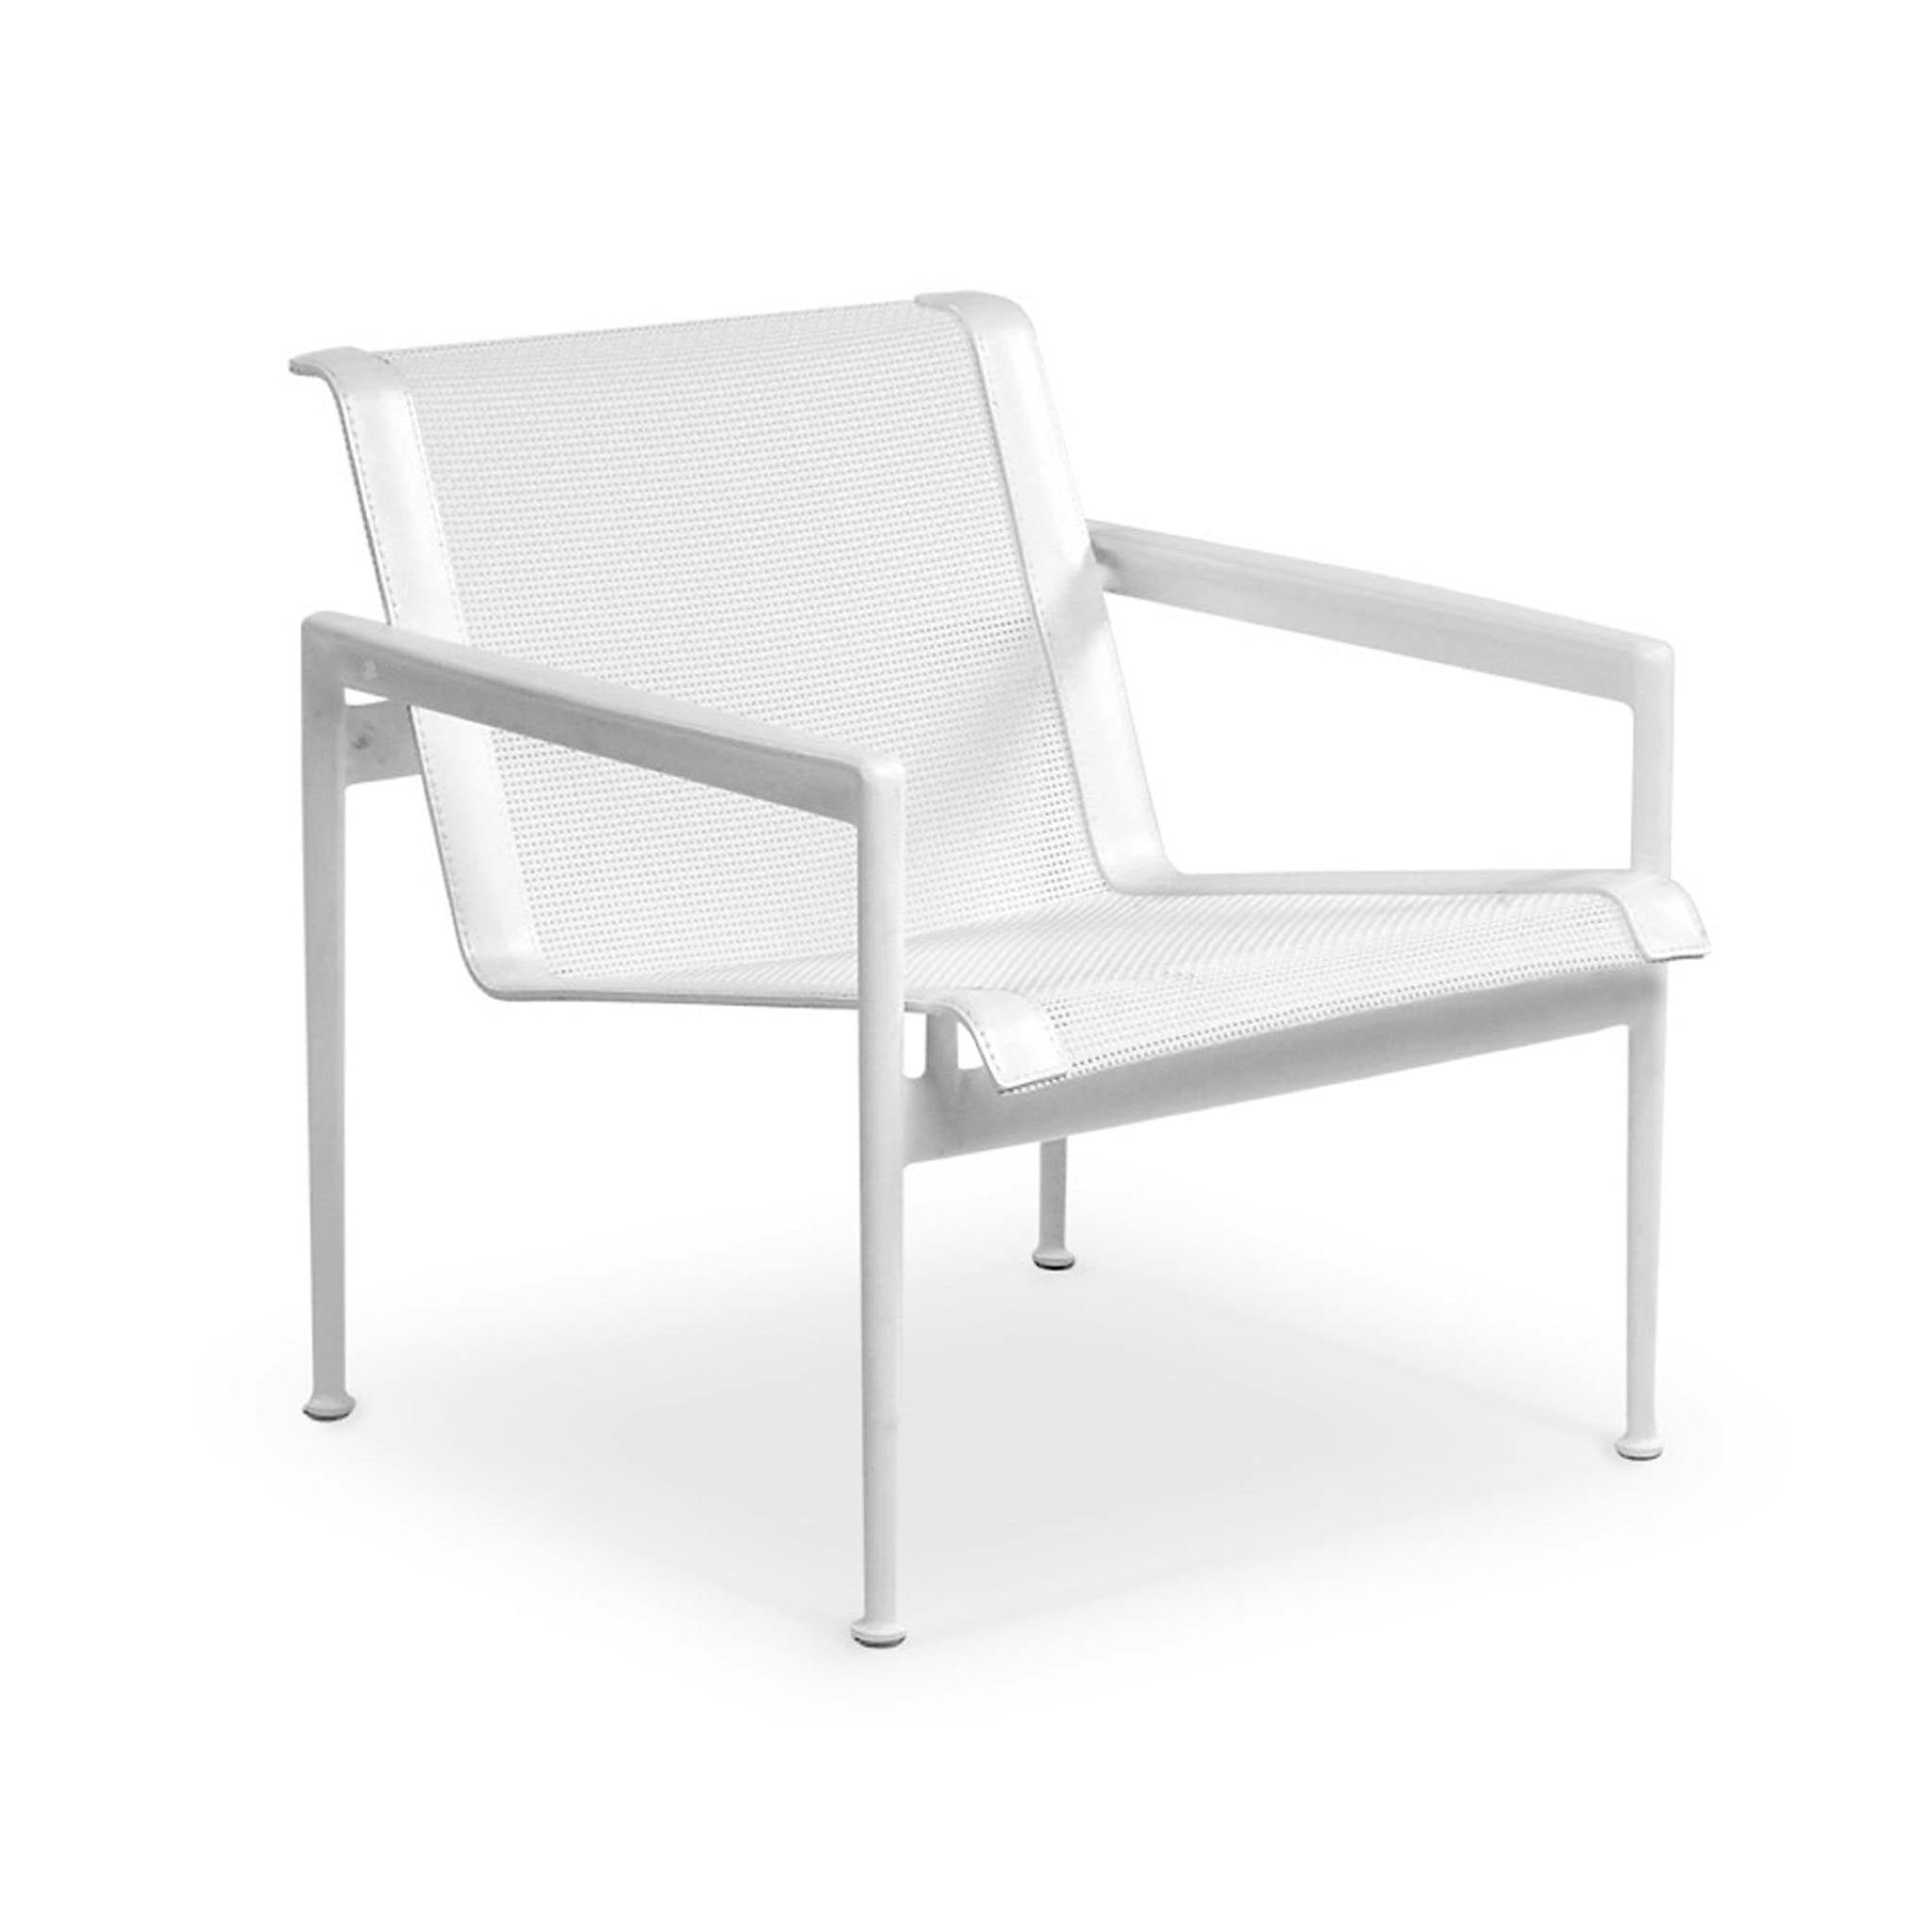 1966 Lounge Chair With Arms by Knoll